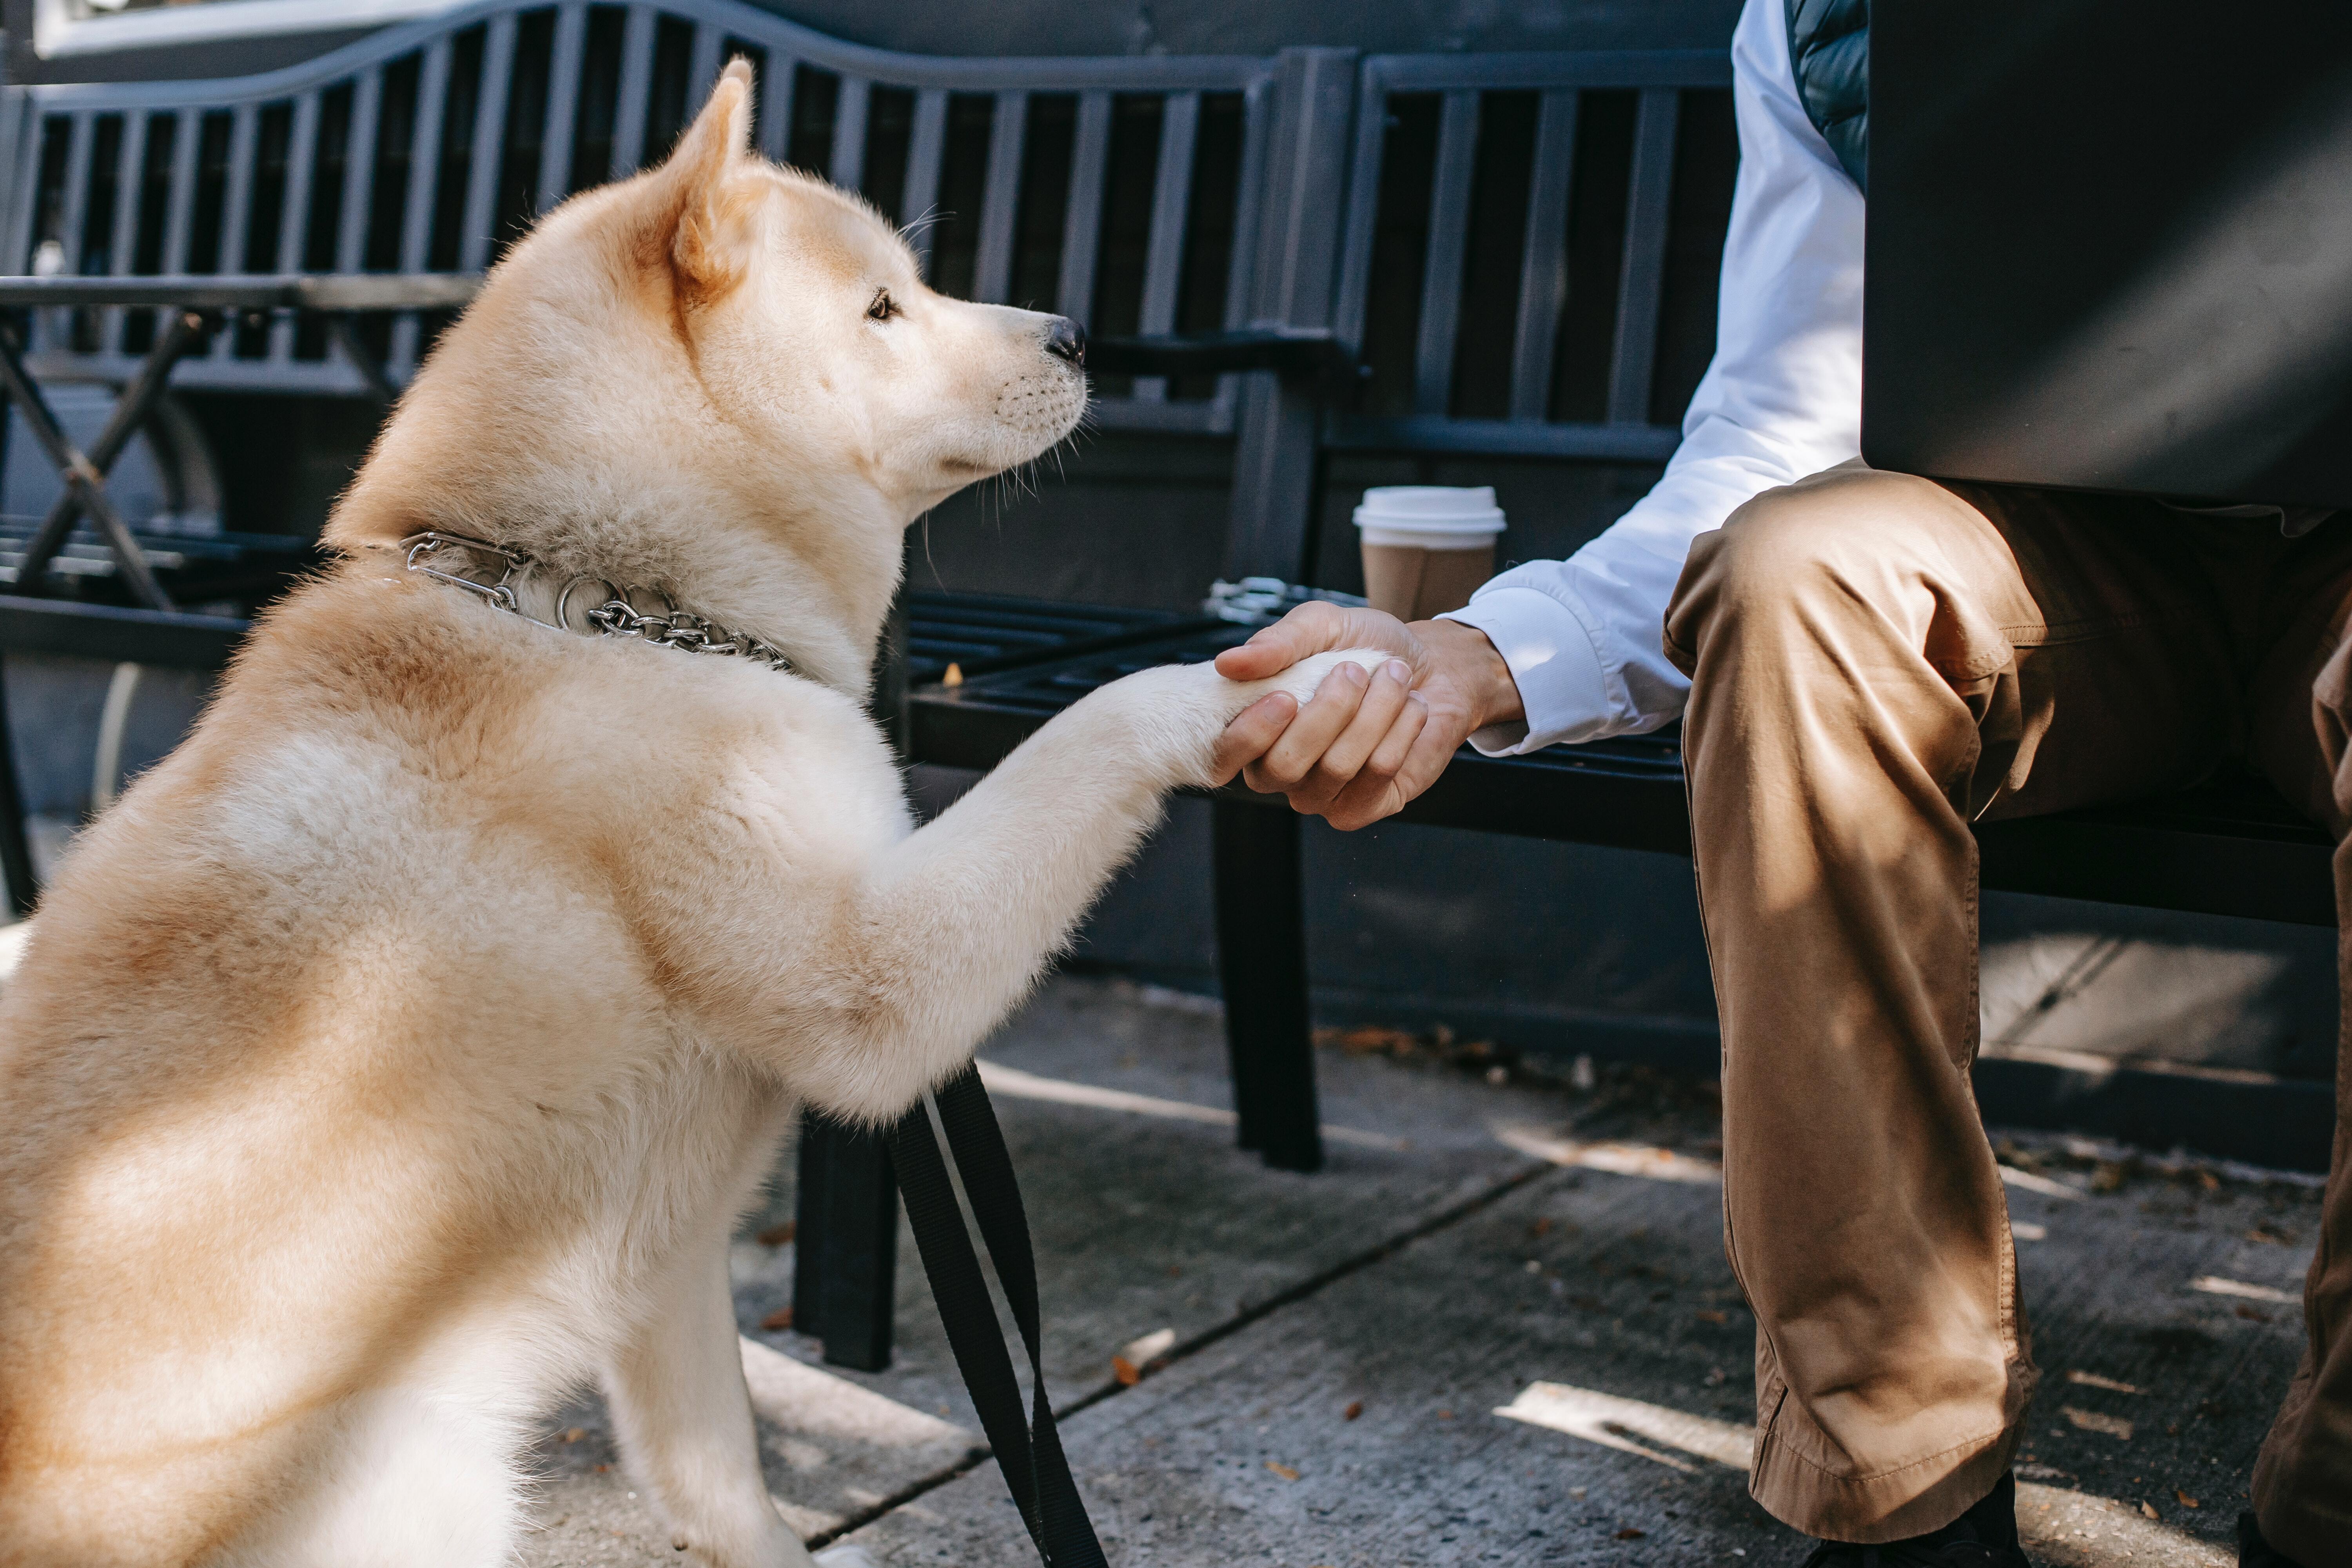 Dog Body Language: A husky-like dog giving paw to its owner.